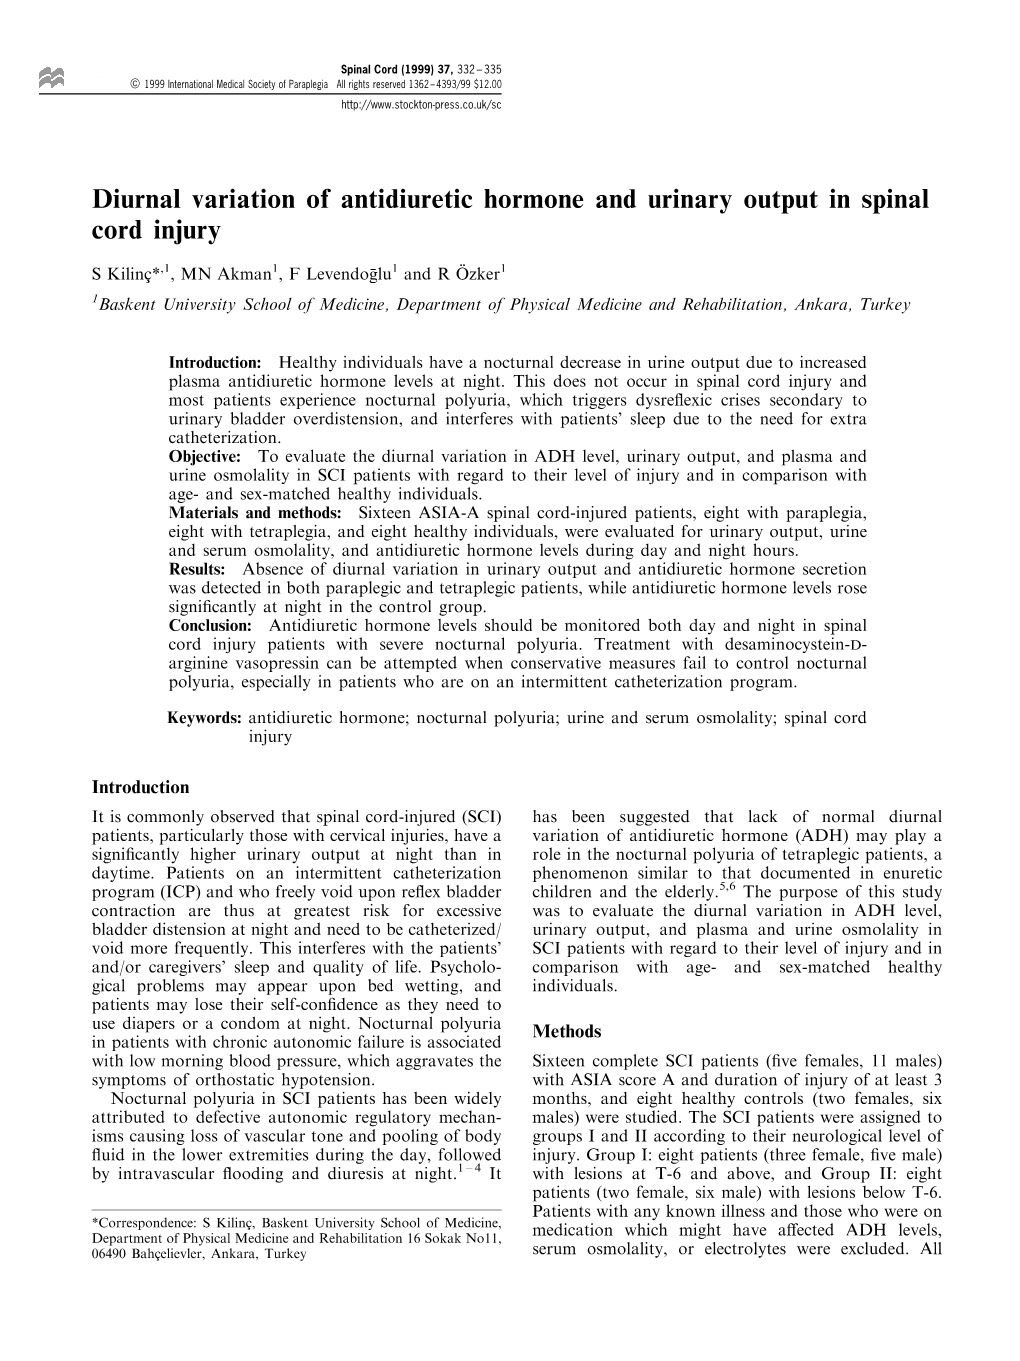 Diurnal Variation of Antidiuretic Hormone and Urinary Output in Spinal Cord Injury